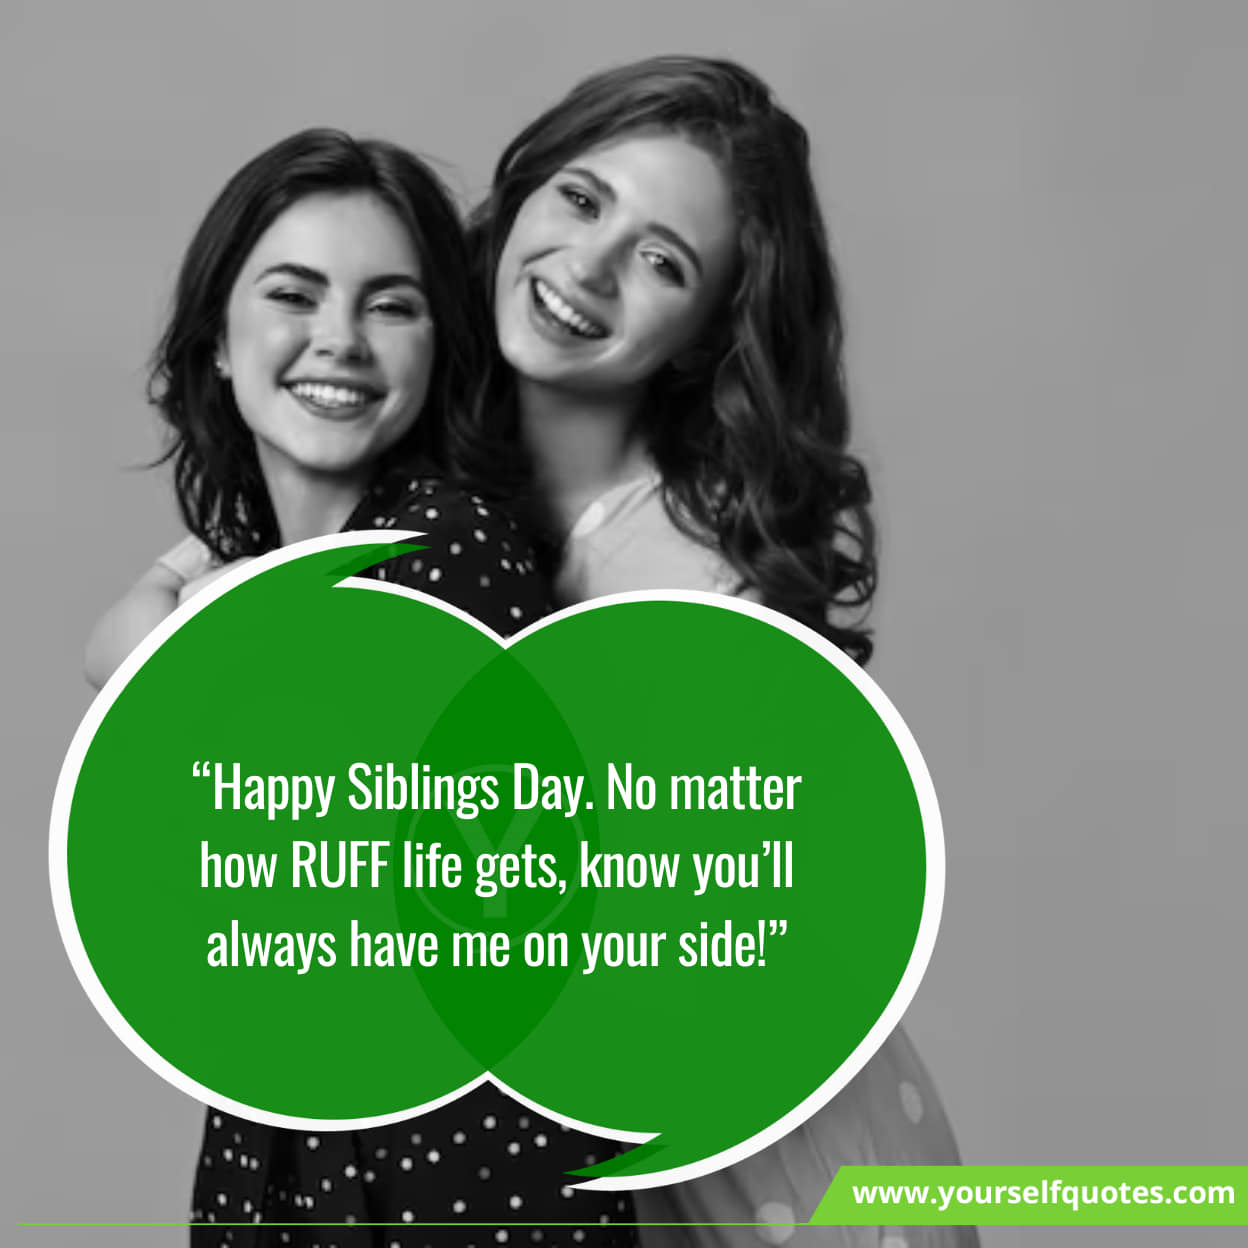 Expressing Gratitude for Siblings on National Siblings Day